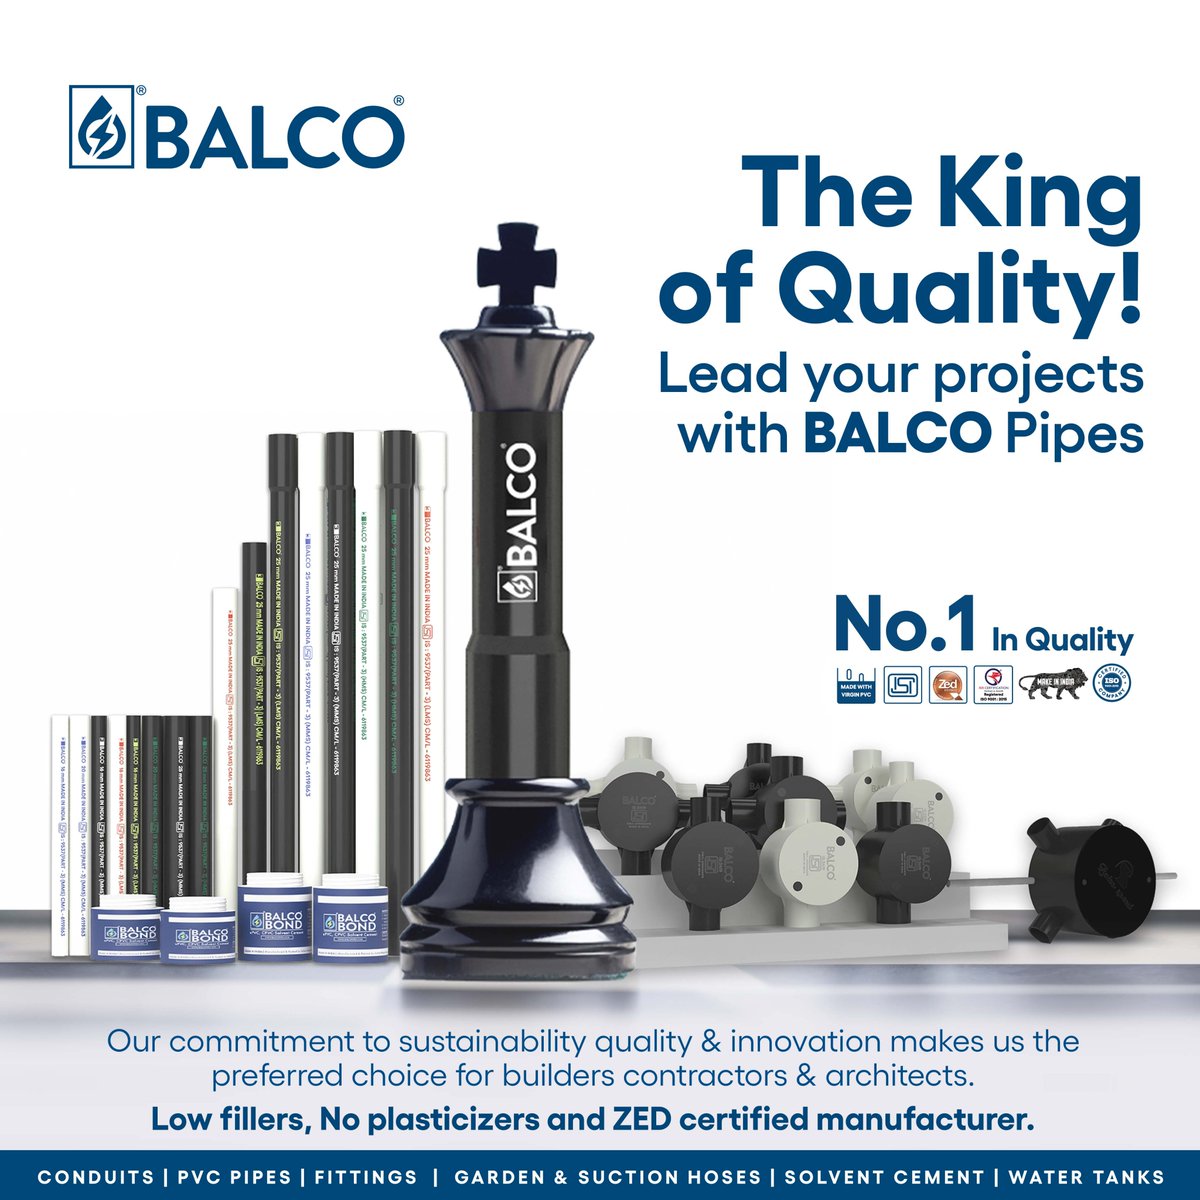 Elevate your projects with BALCO Pipes - Setting the standard for quality and reliability. 👑 #BALCOKingOfQuality #industryleader #balco #pipes #pvc #balcopipes #QualityLeaders #plumbing #electrical #wiring #conduits #pvcpipes #builders #construction